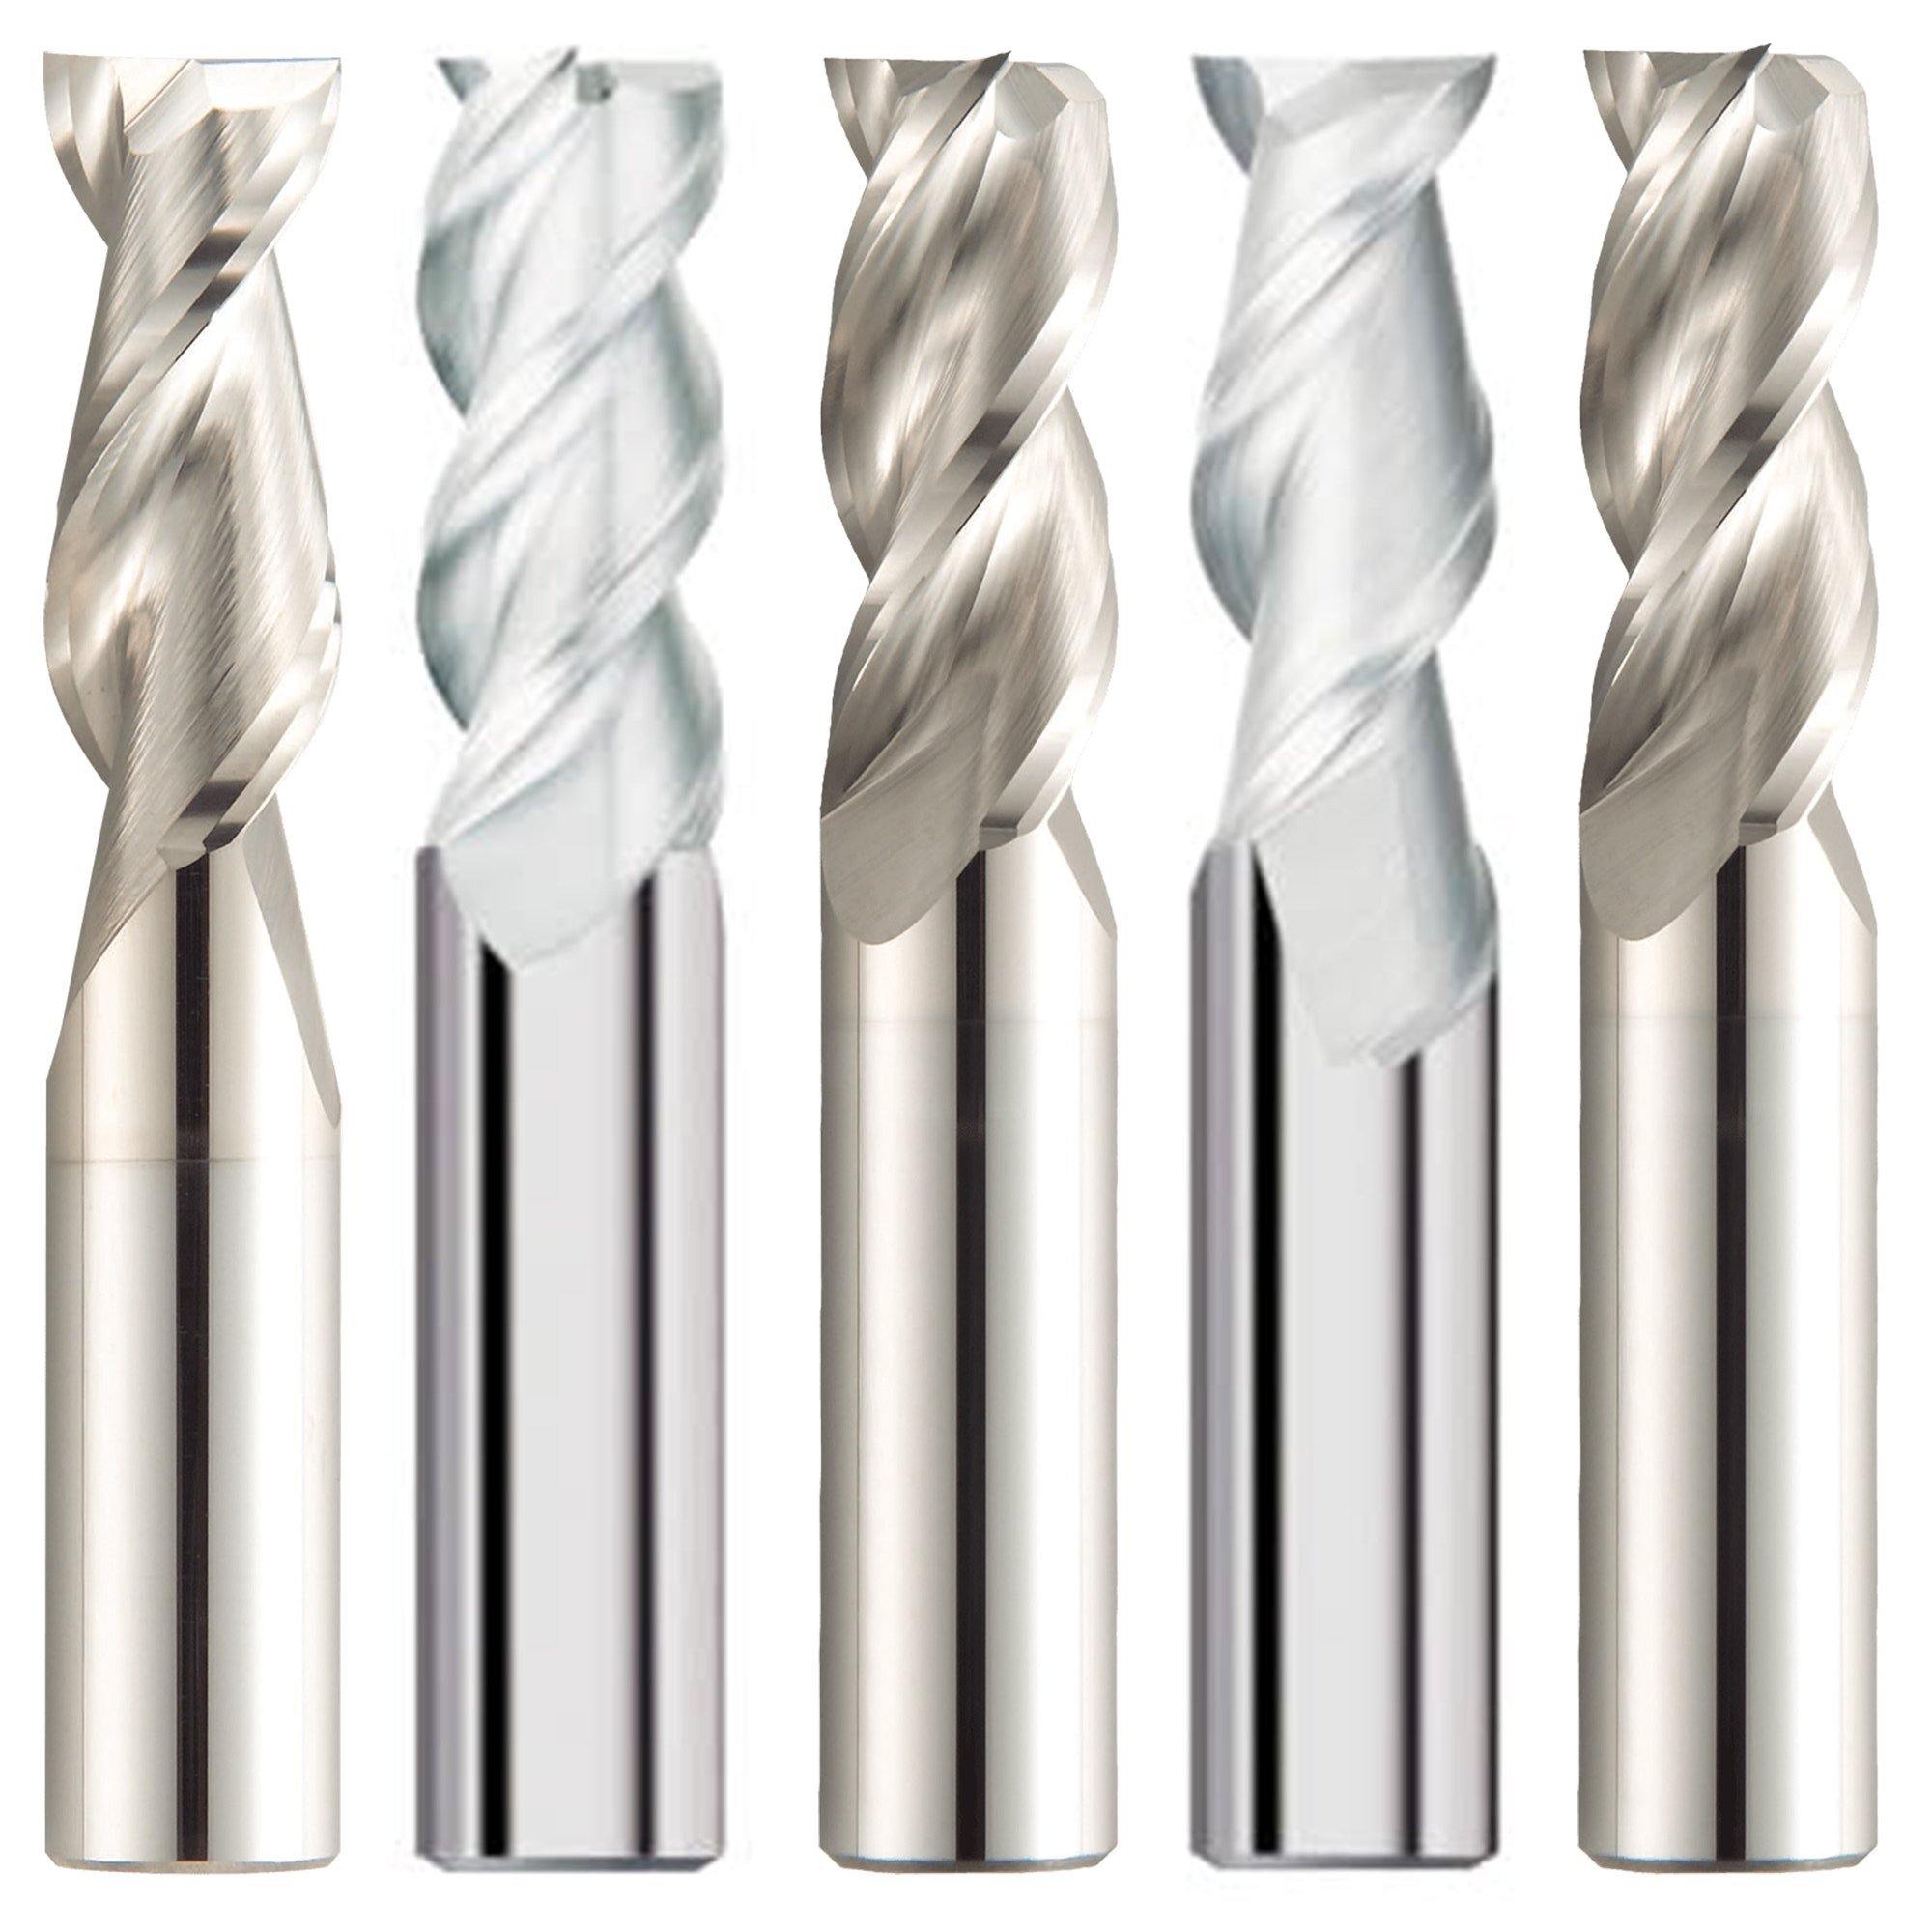 (5 Pack) 1/4" x 3/4" x 2-1/2" Aluminum HP Carbide End Mills - The End Mill Store 